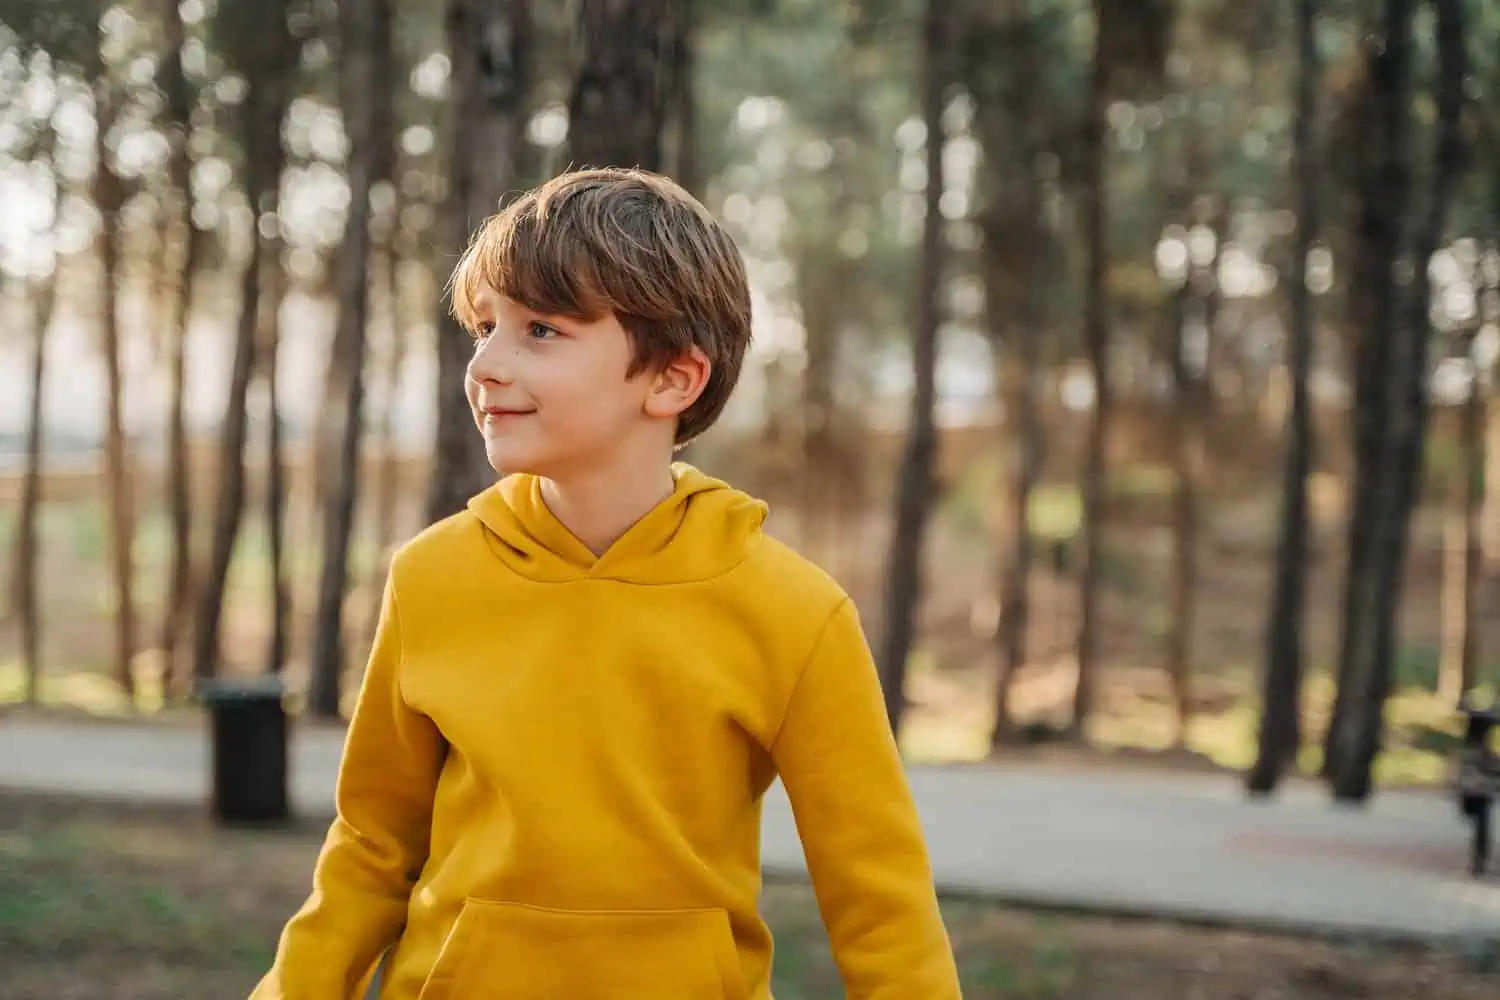 Adorable young boy in yellow jacket against forest background